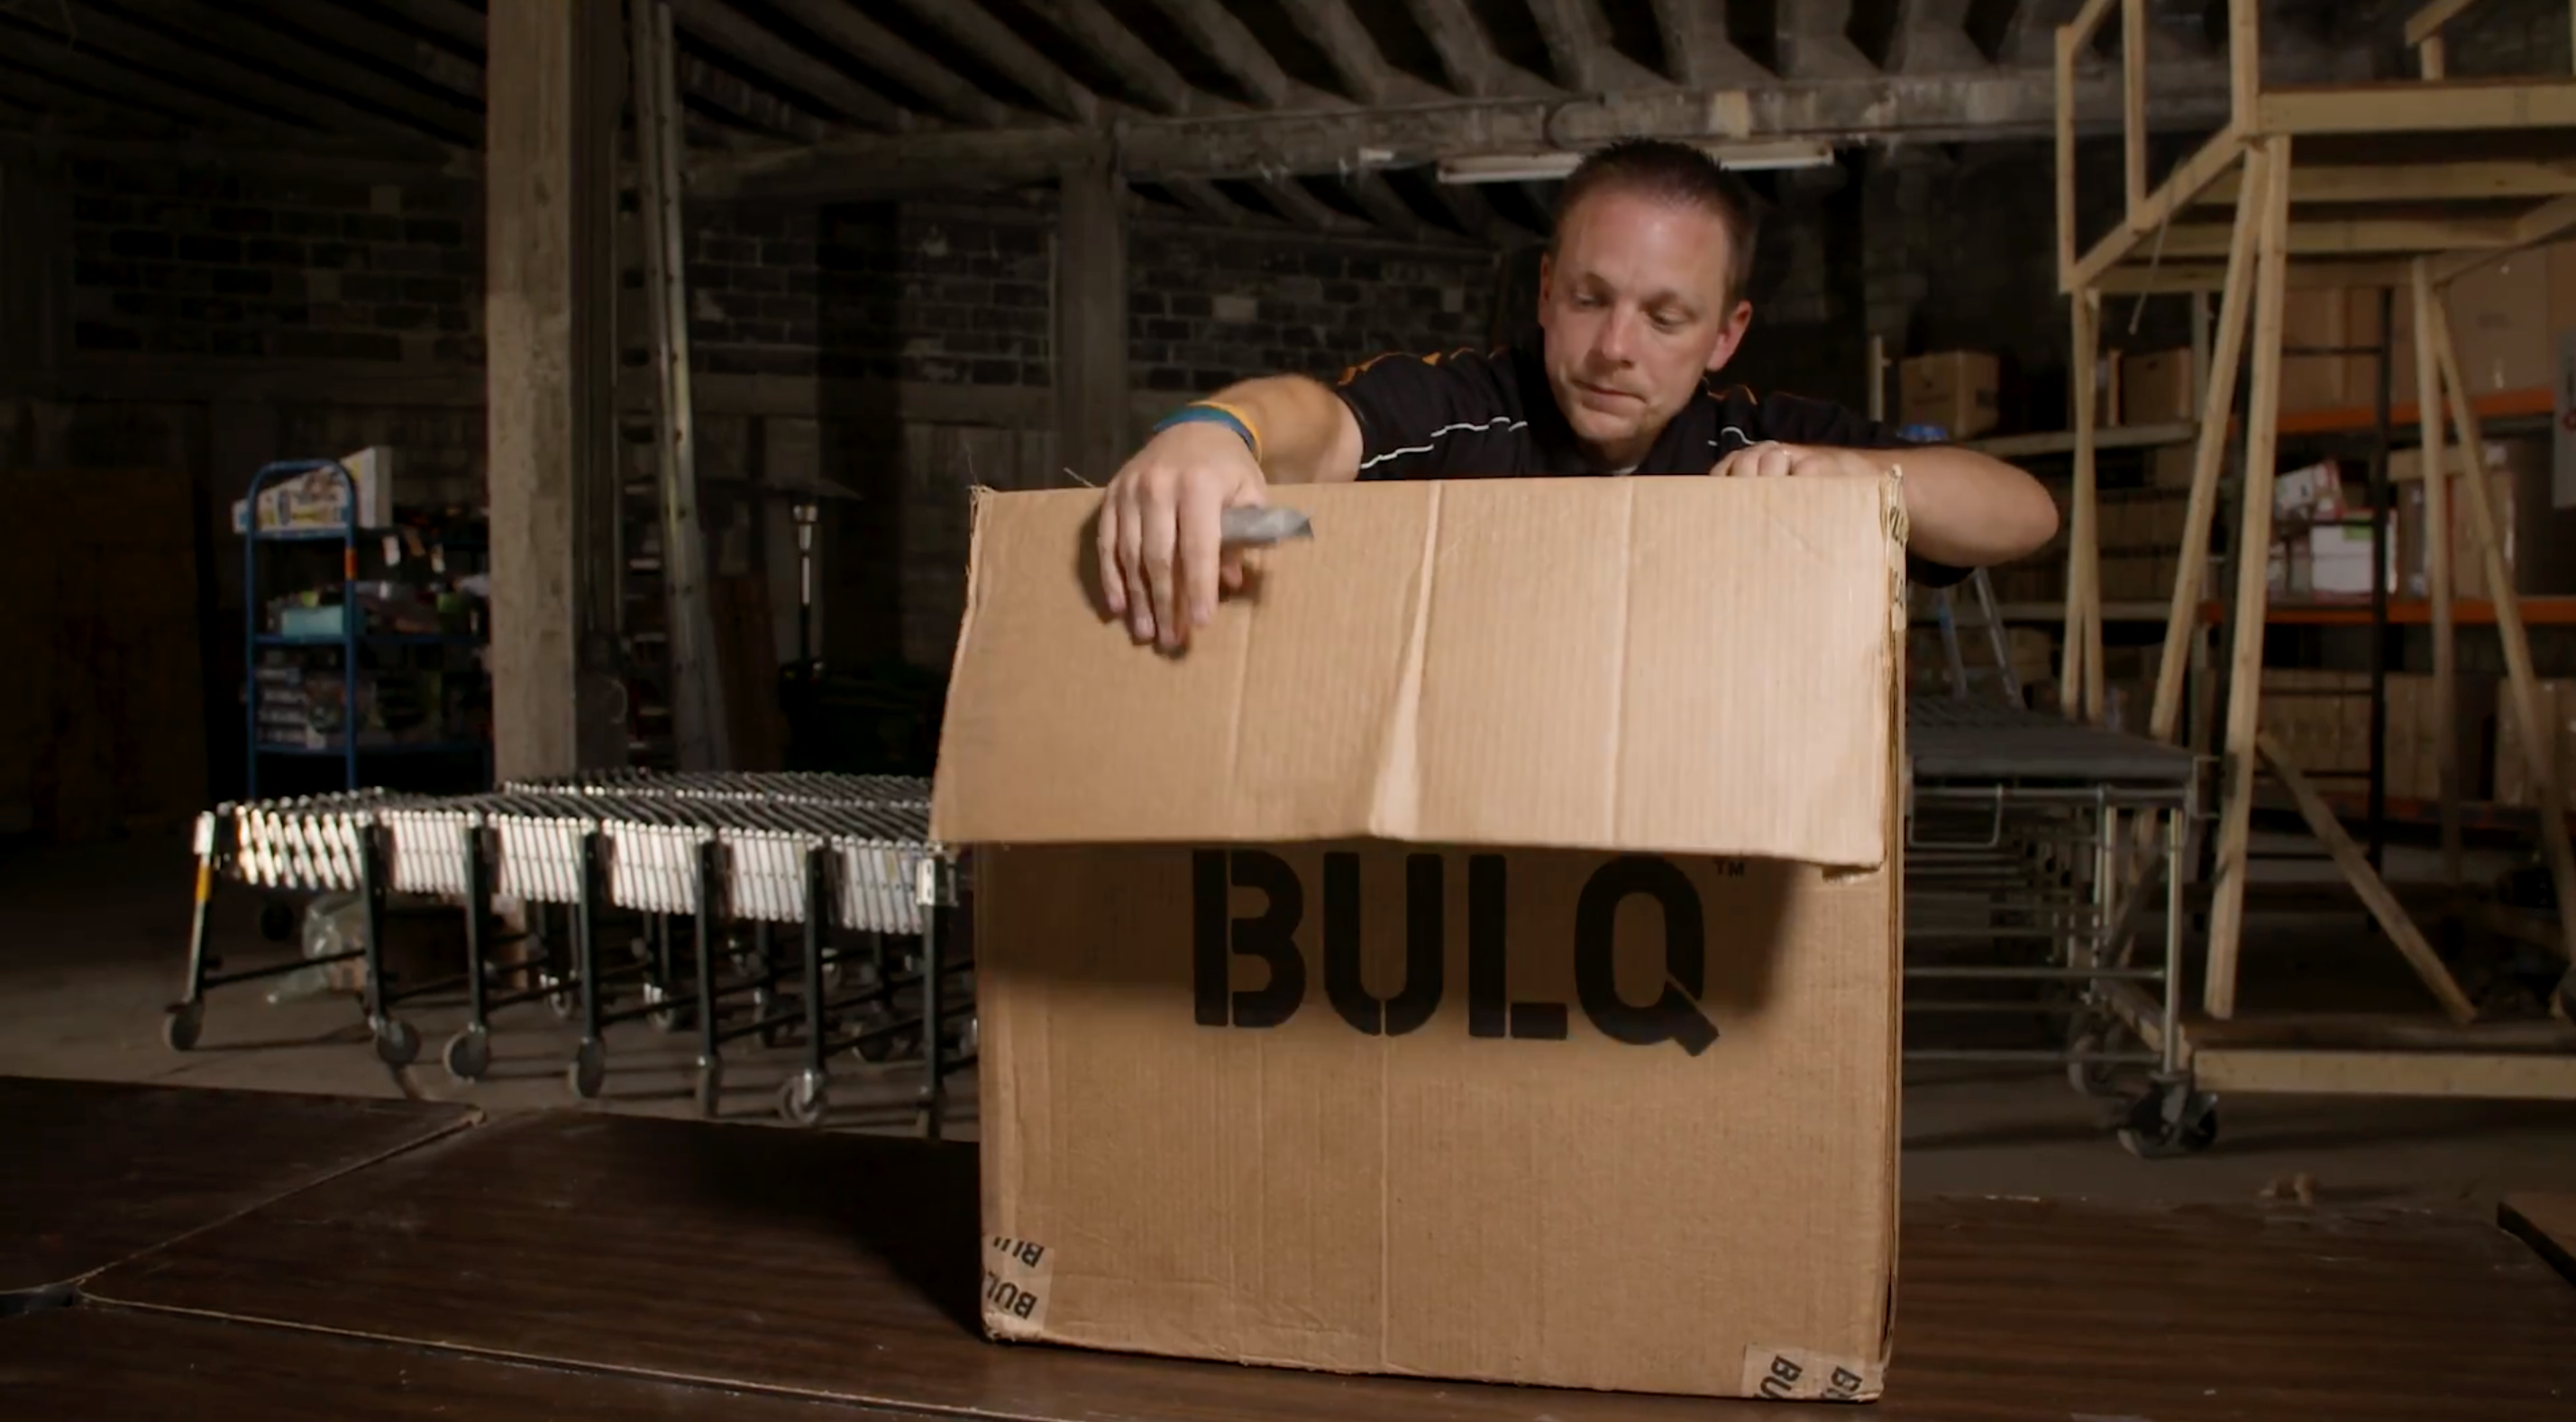 Extreme Unboxing star Chuck Popovich opens a BULQ box